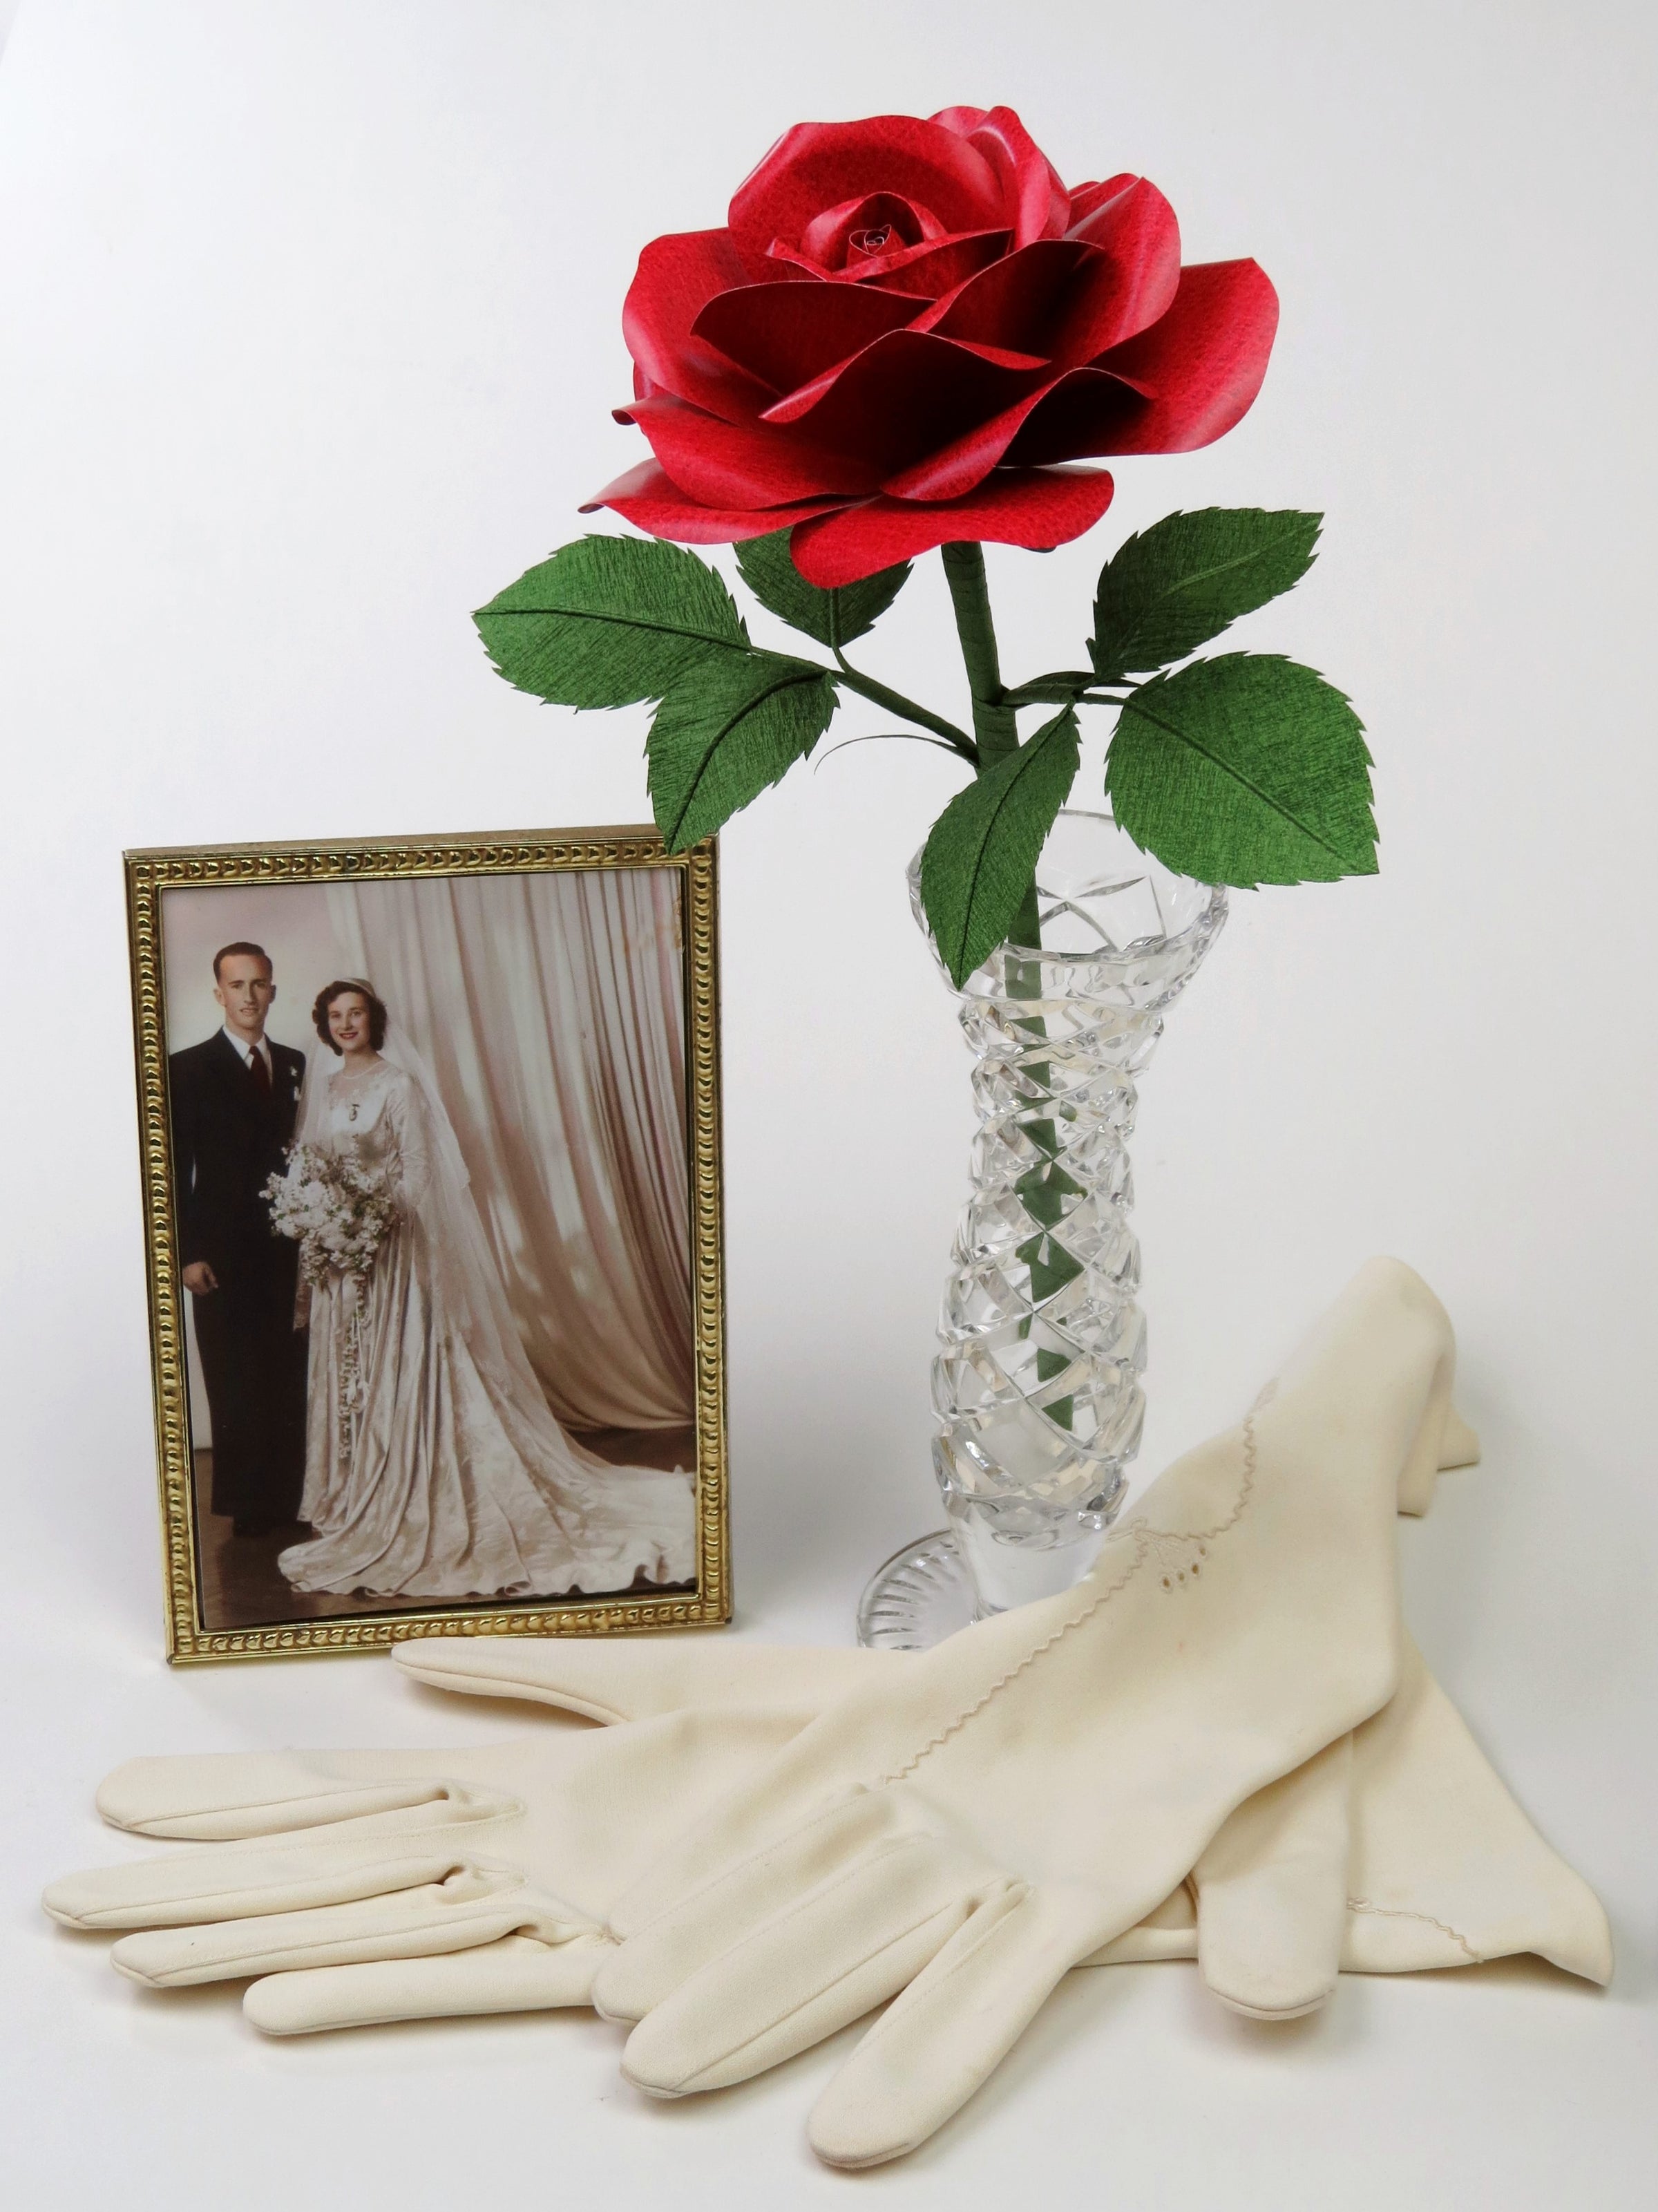 Red leather grain paper rose with six green leaves standing in a slender glass vase with a framed wedding photo of a happy bride and groom standing beside it. Lying at the front is a pair of vintage cream gloves. 